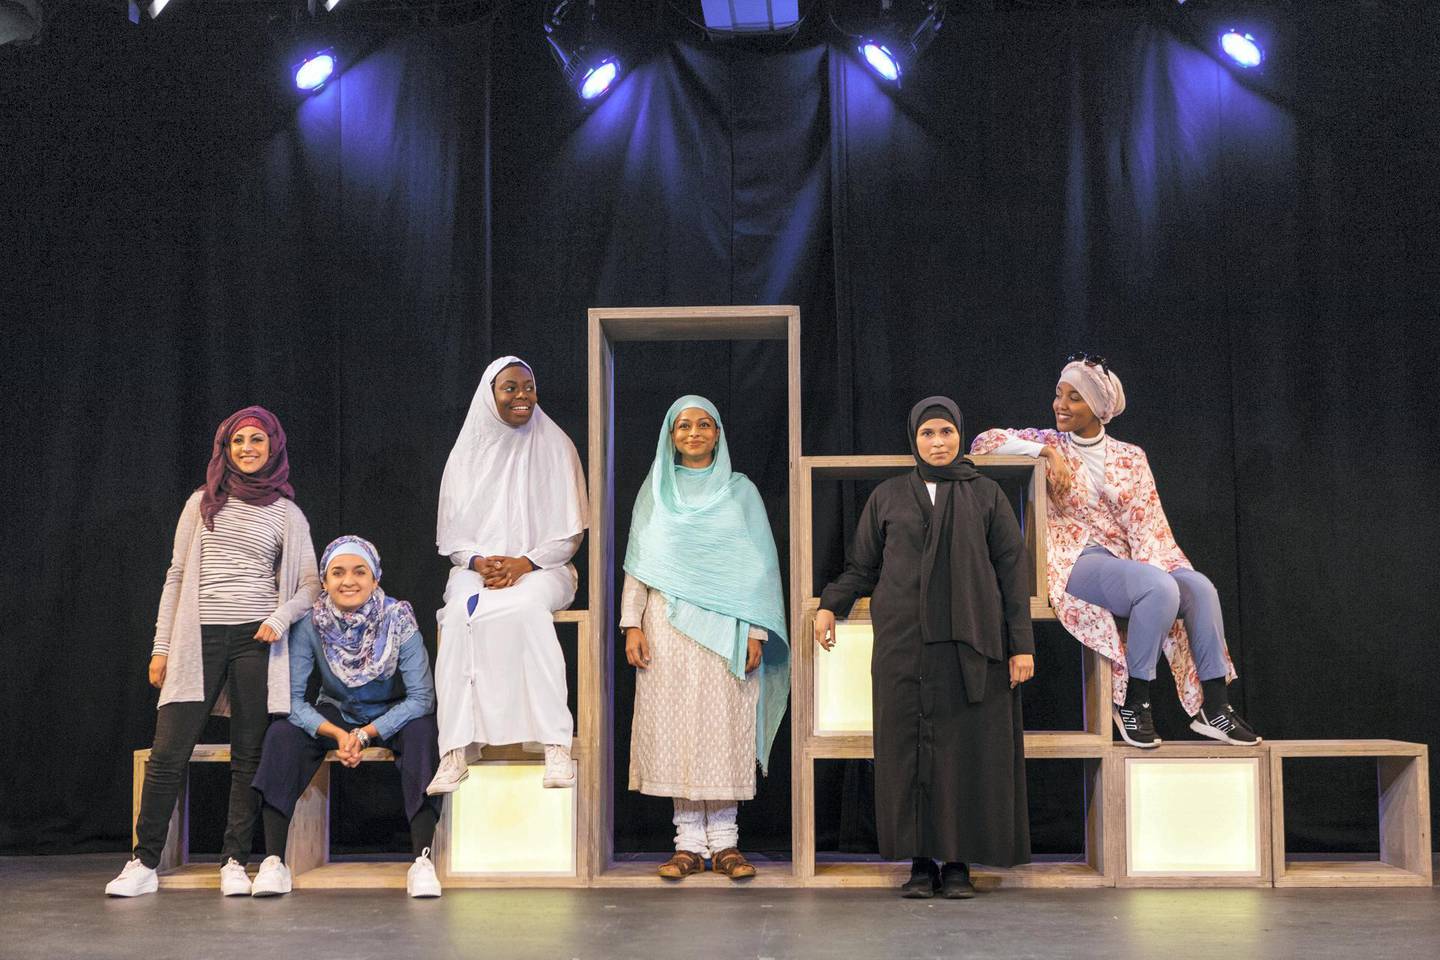 Performers from ‘Hijabi Monologues London’ act out stories drawn from the experiences of Muslim women. Courtesy Helen Murray